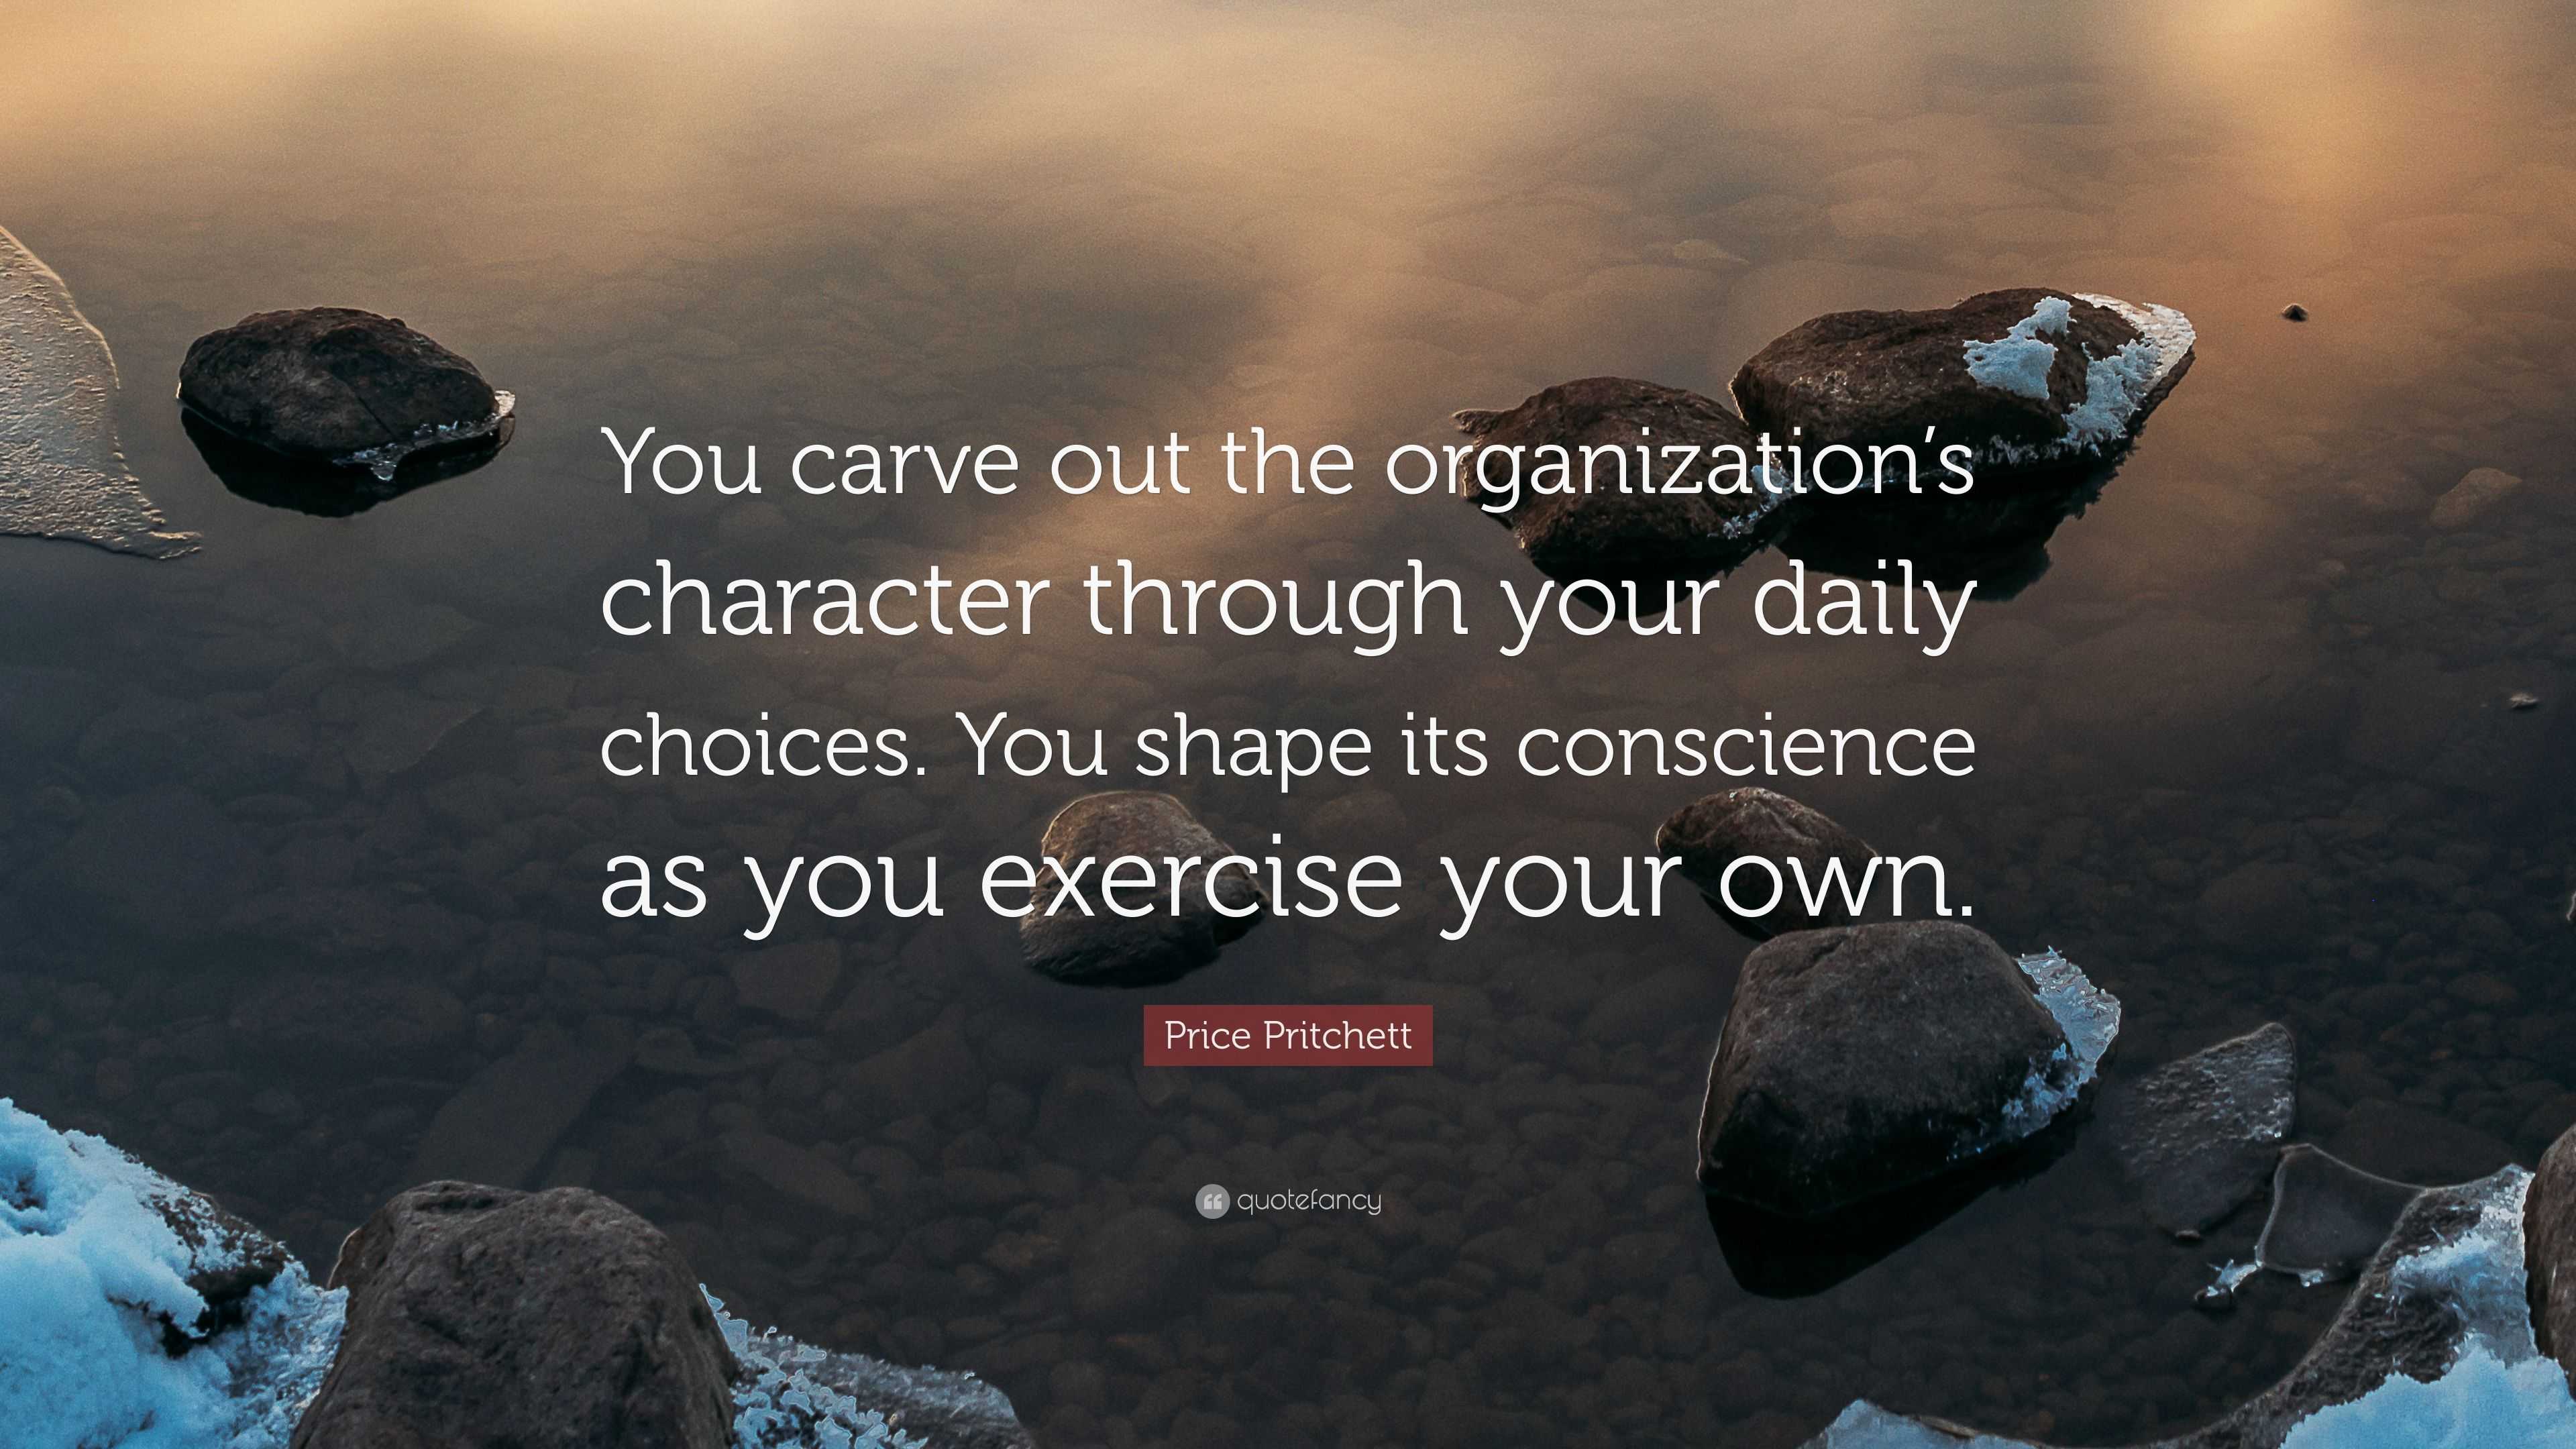 https://quotefancy.com/media/wallpaper/3840x2160/3080448-Price-Pritchett-Quote-You-carve-out-the-organization-s-character.jpg